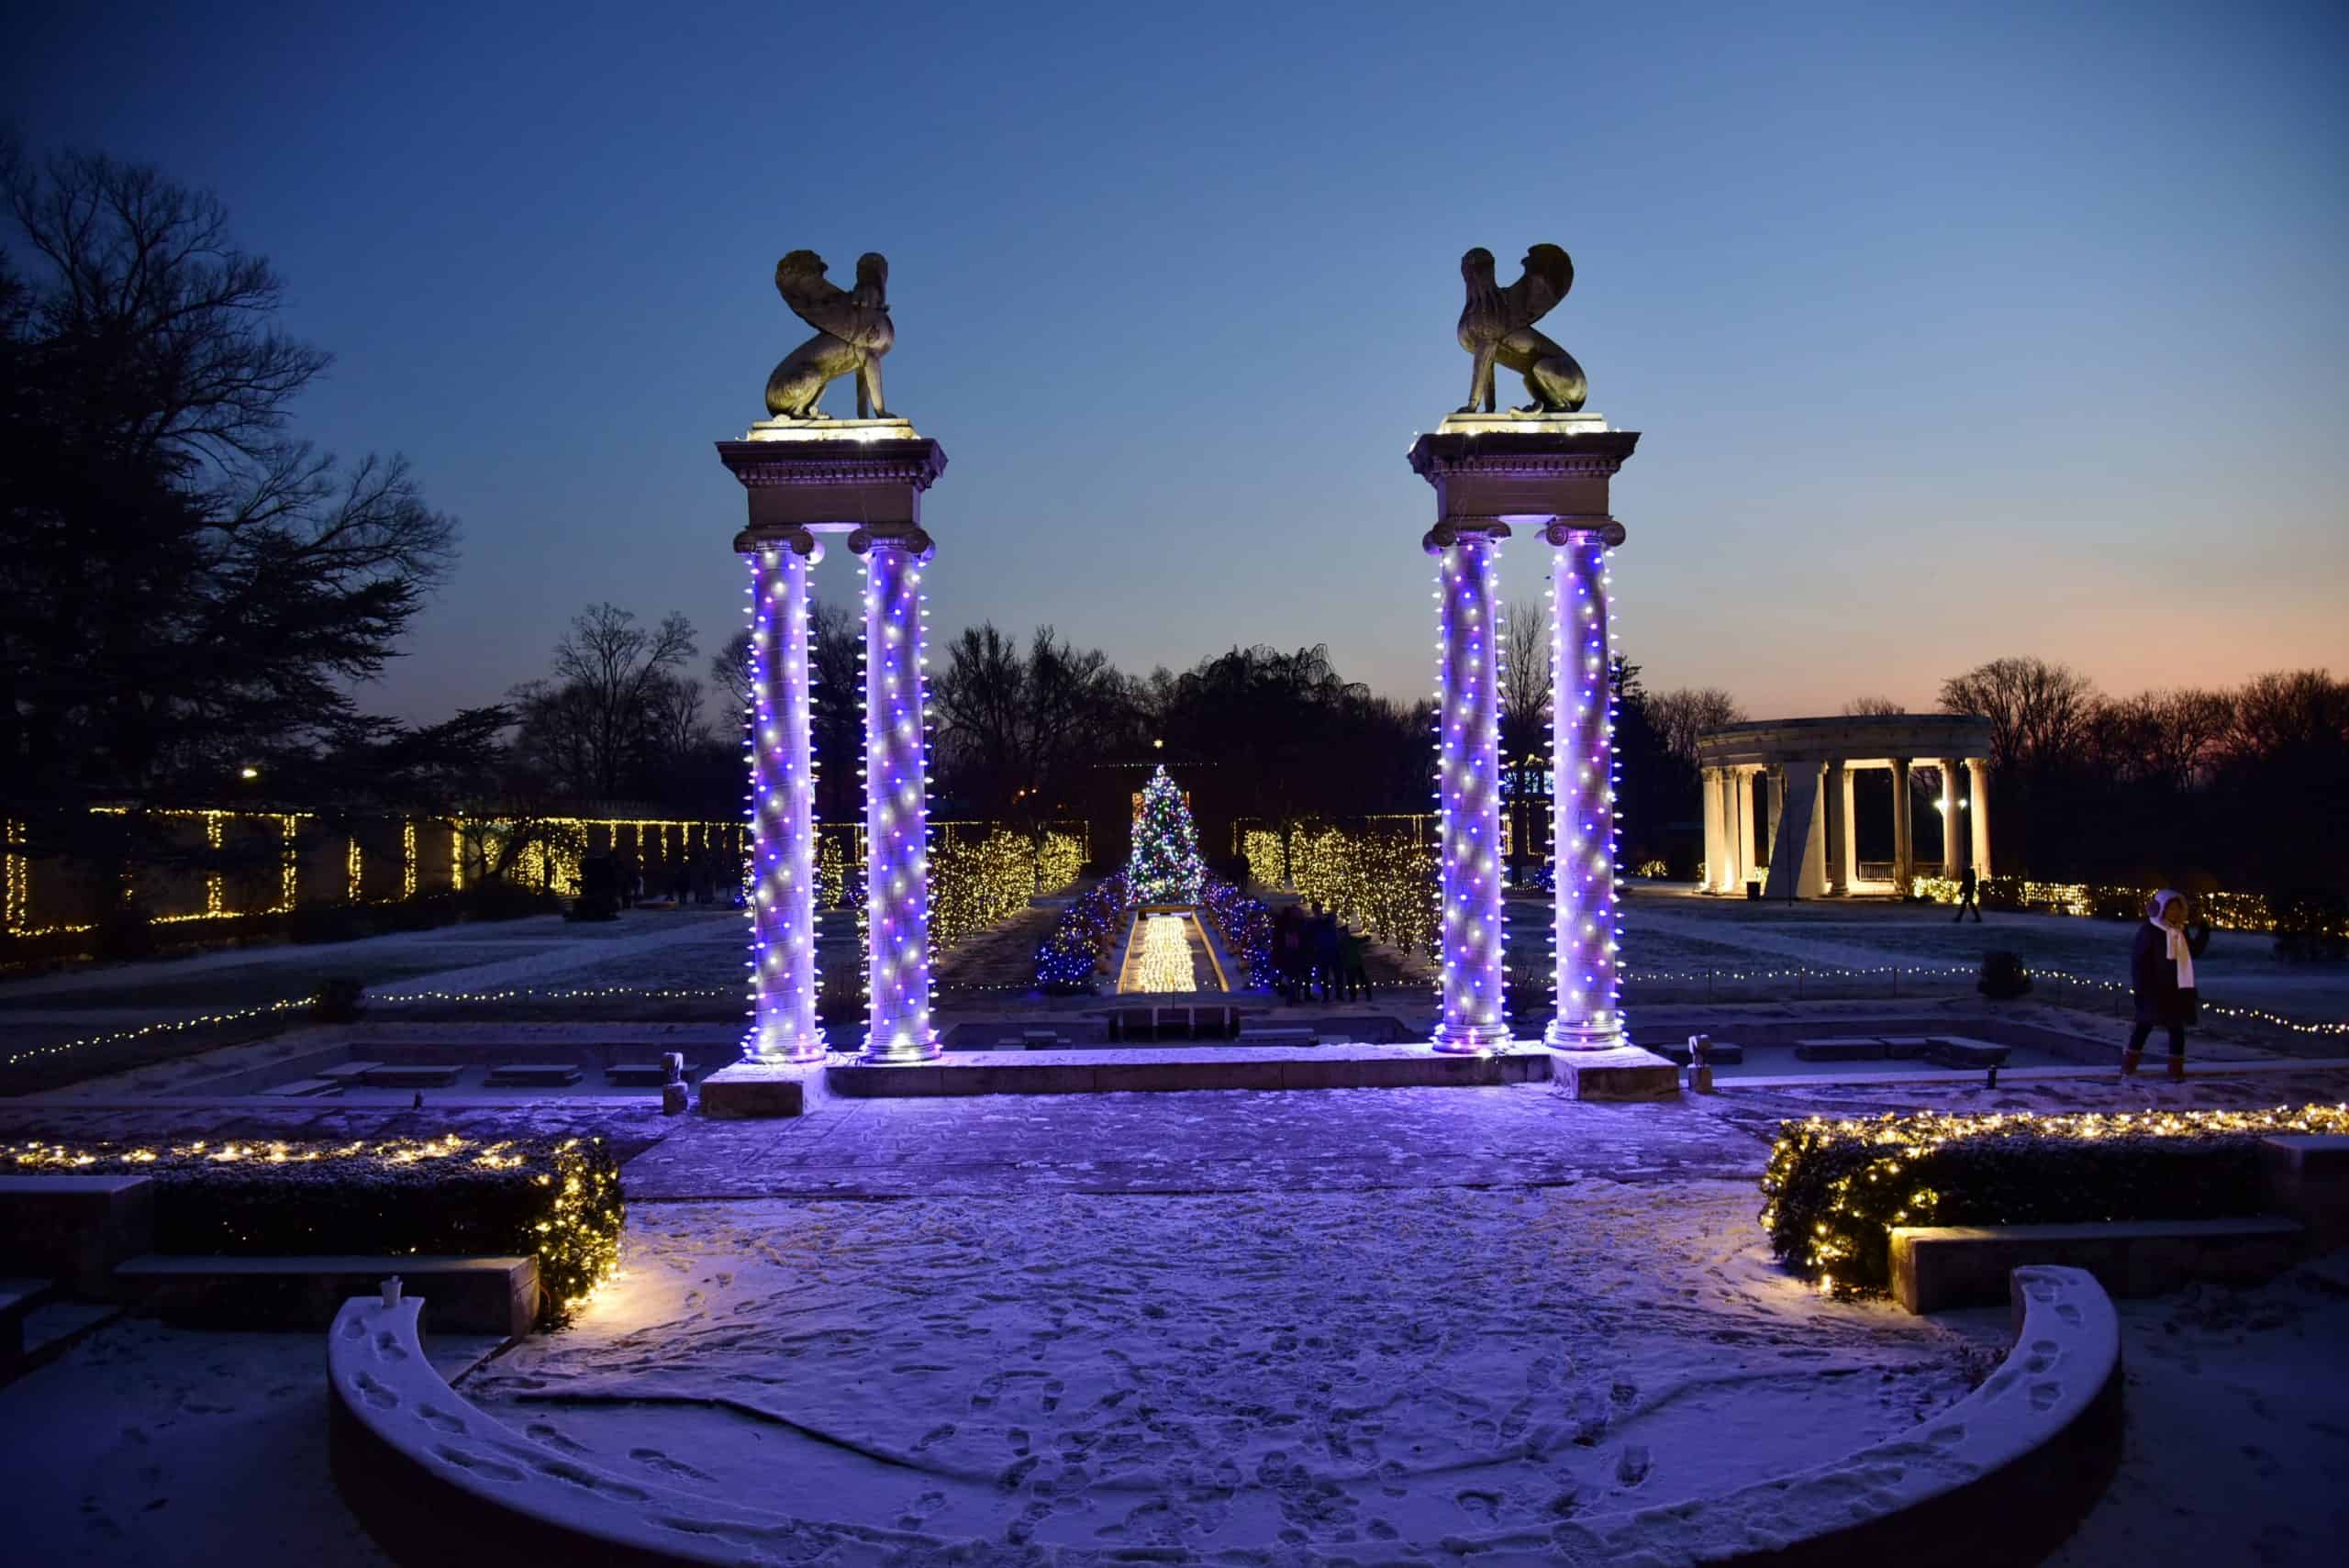 Untermyer Gardens Grand Holiday Illumination Opens December 12 | Yonkers Times